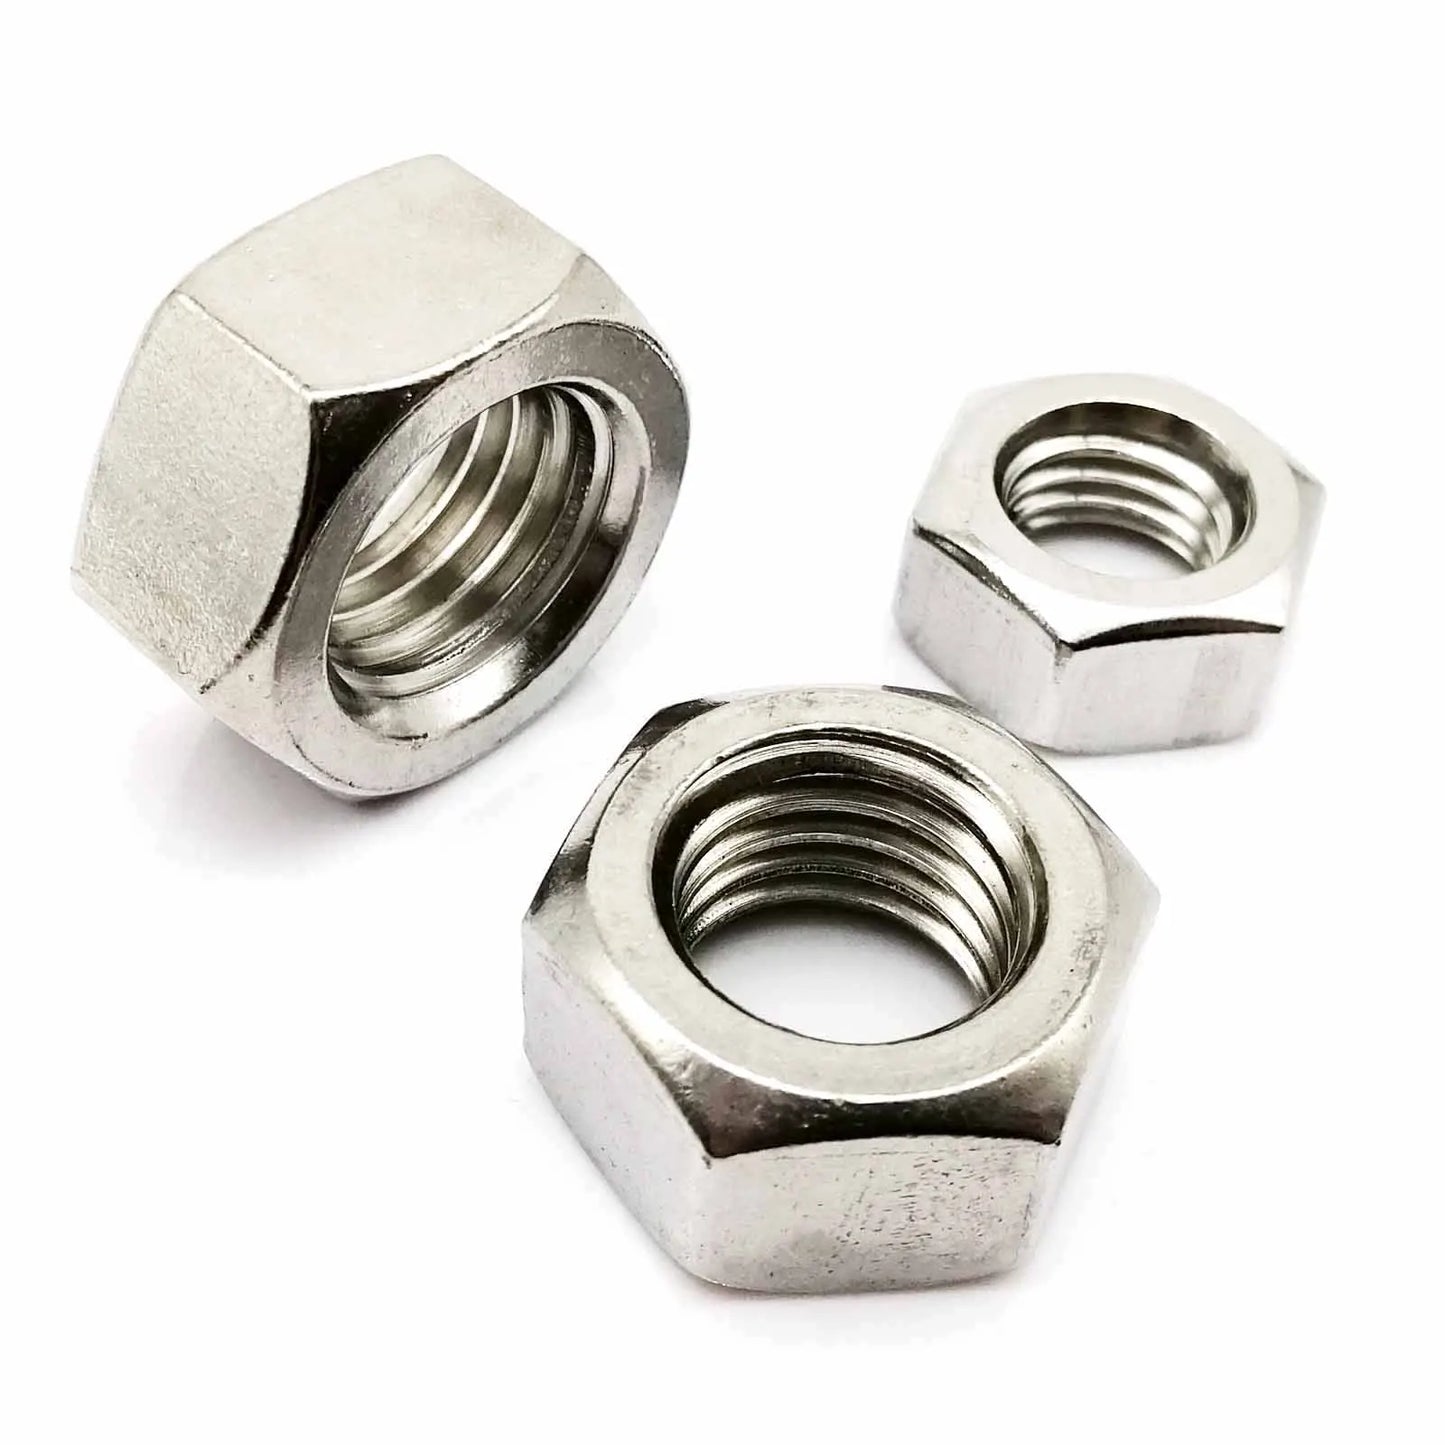 Stainless Steel Hex Nuts in Various Sizes